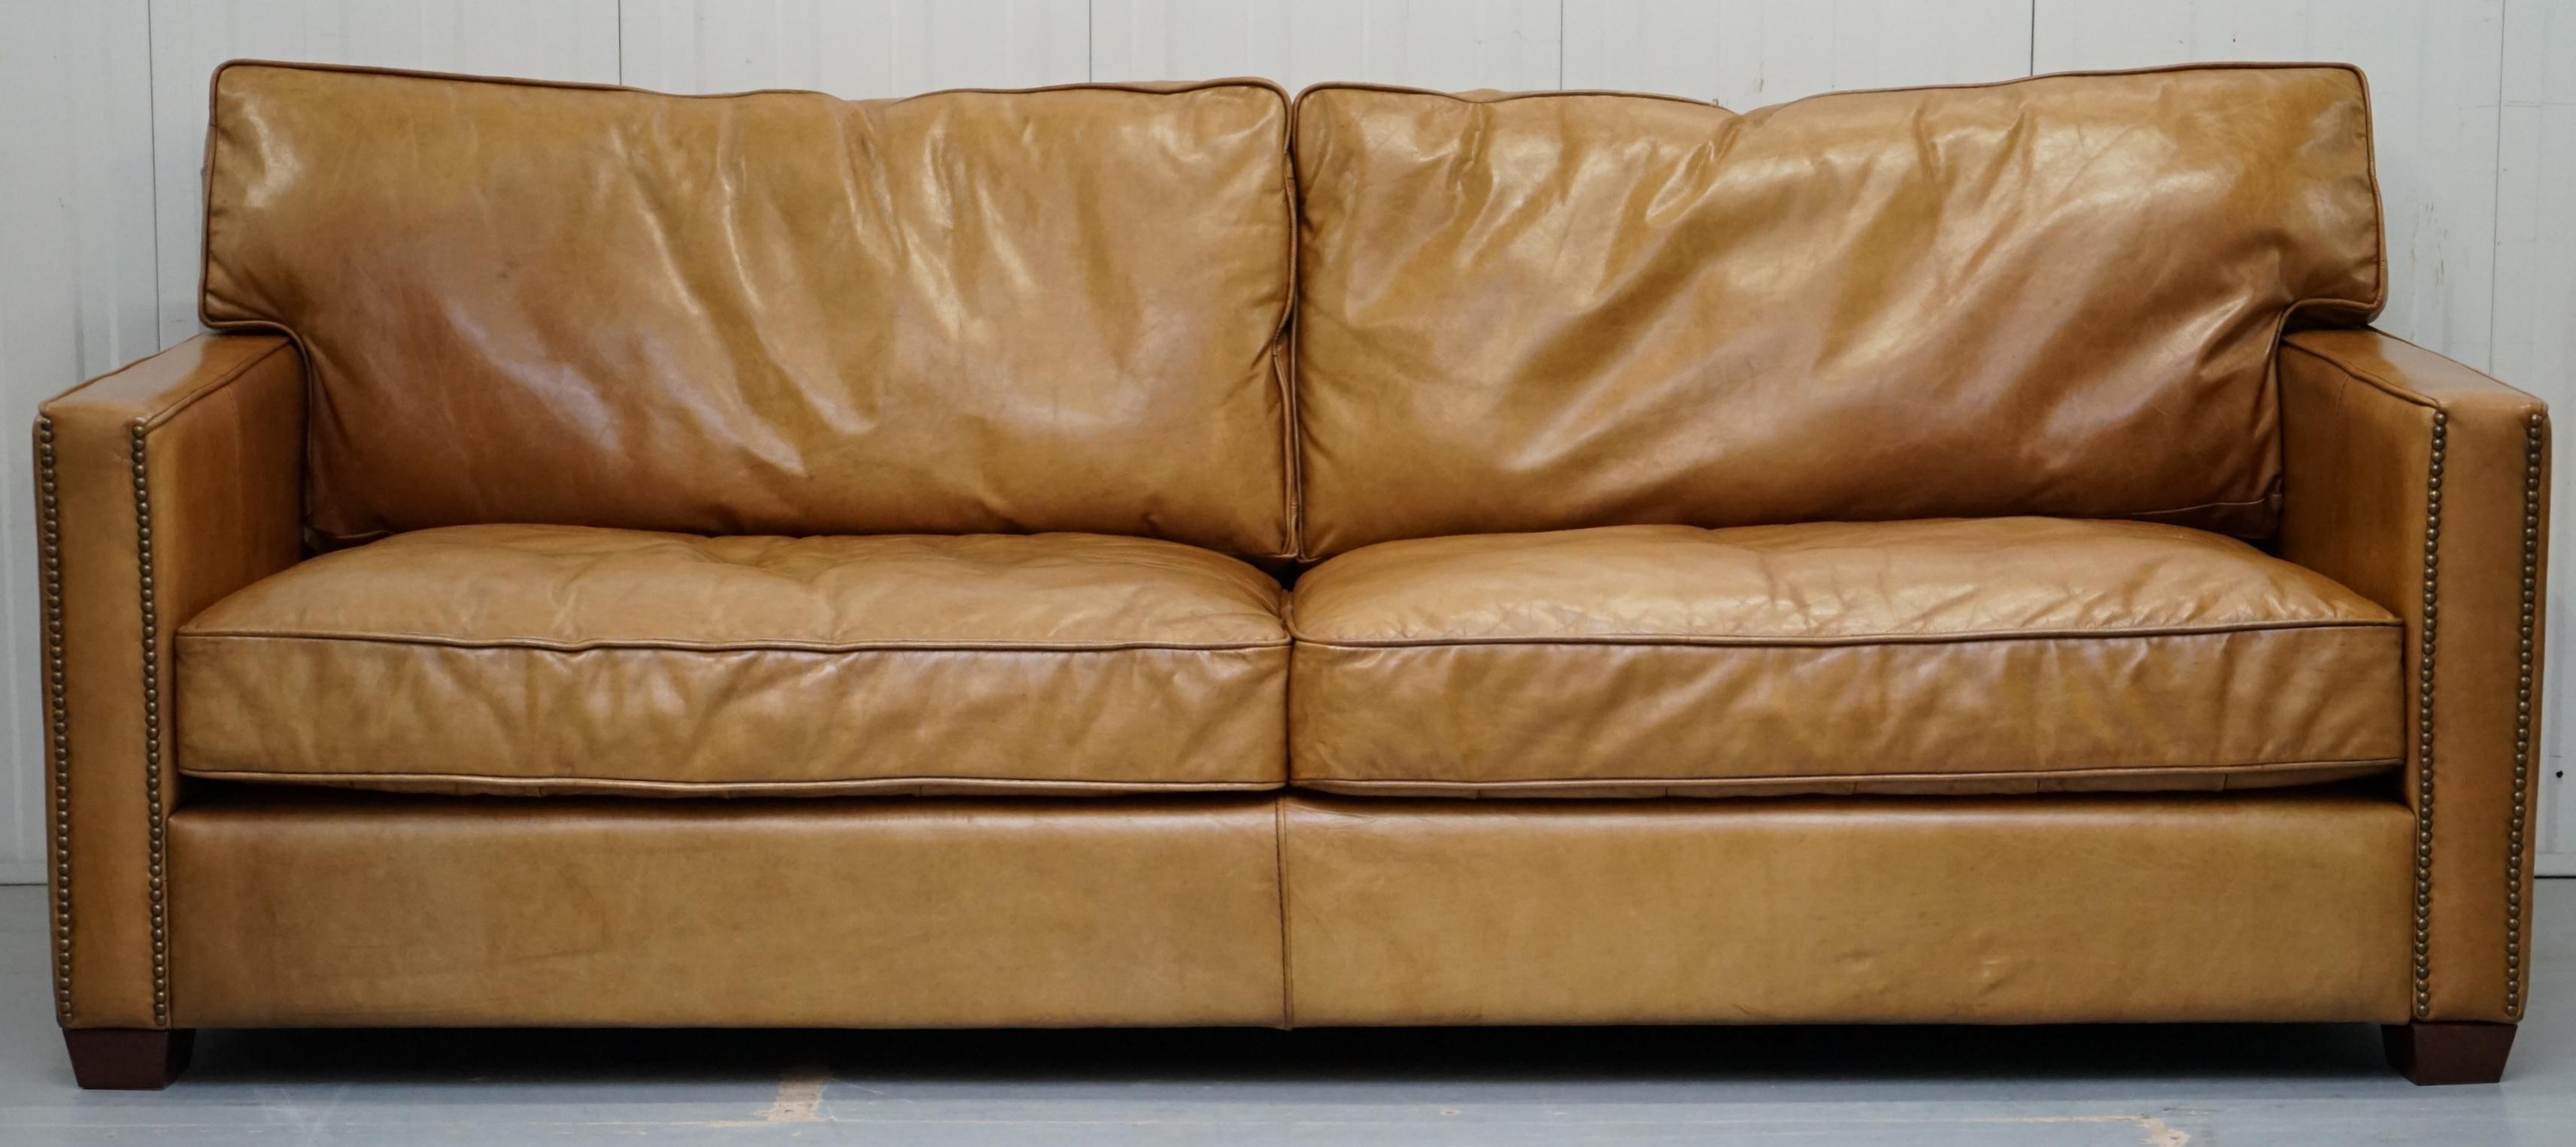 We are delighted to offer for sale this lovely and very comfortable Timothy Oulton Viscount William large three seat brown leather sofa RRP £2175.

We have deep cleaned hand condition waxed and hand polished it from top to bottom, there will be